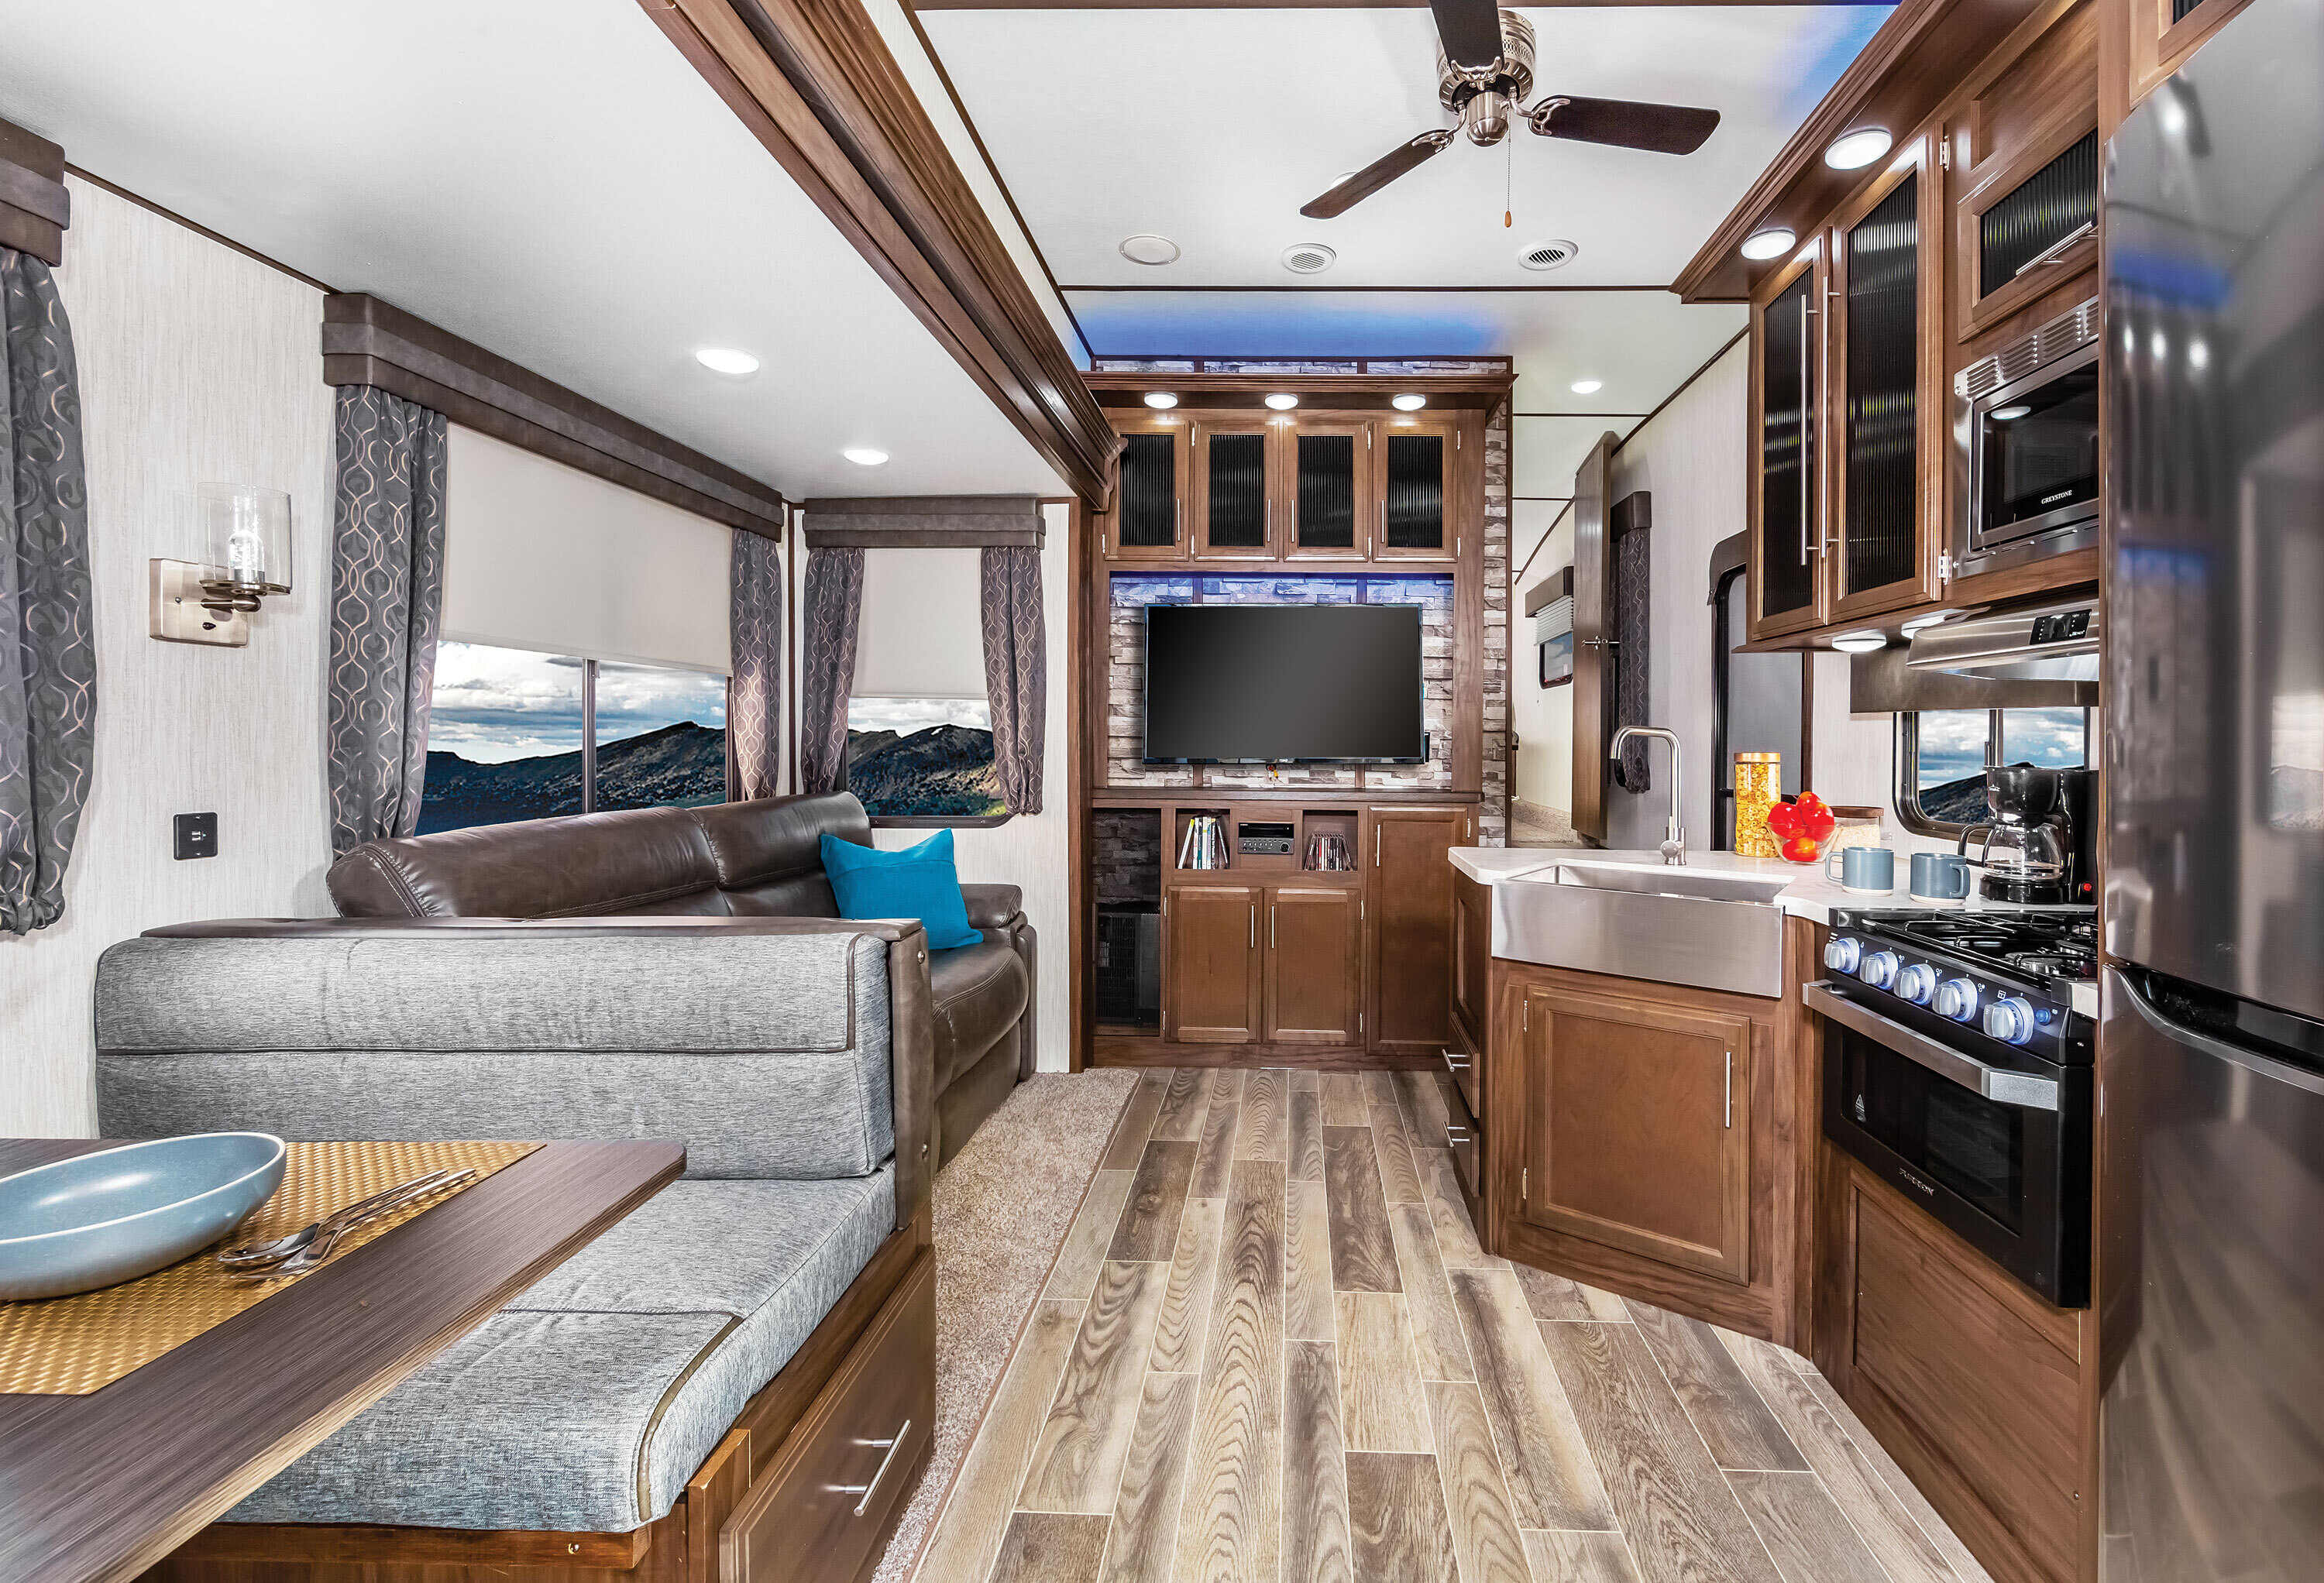 Top 4 Rvs For Fall And Winter Camping